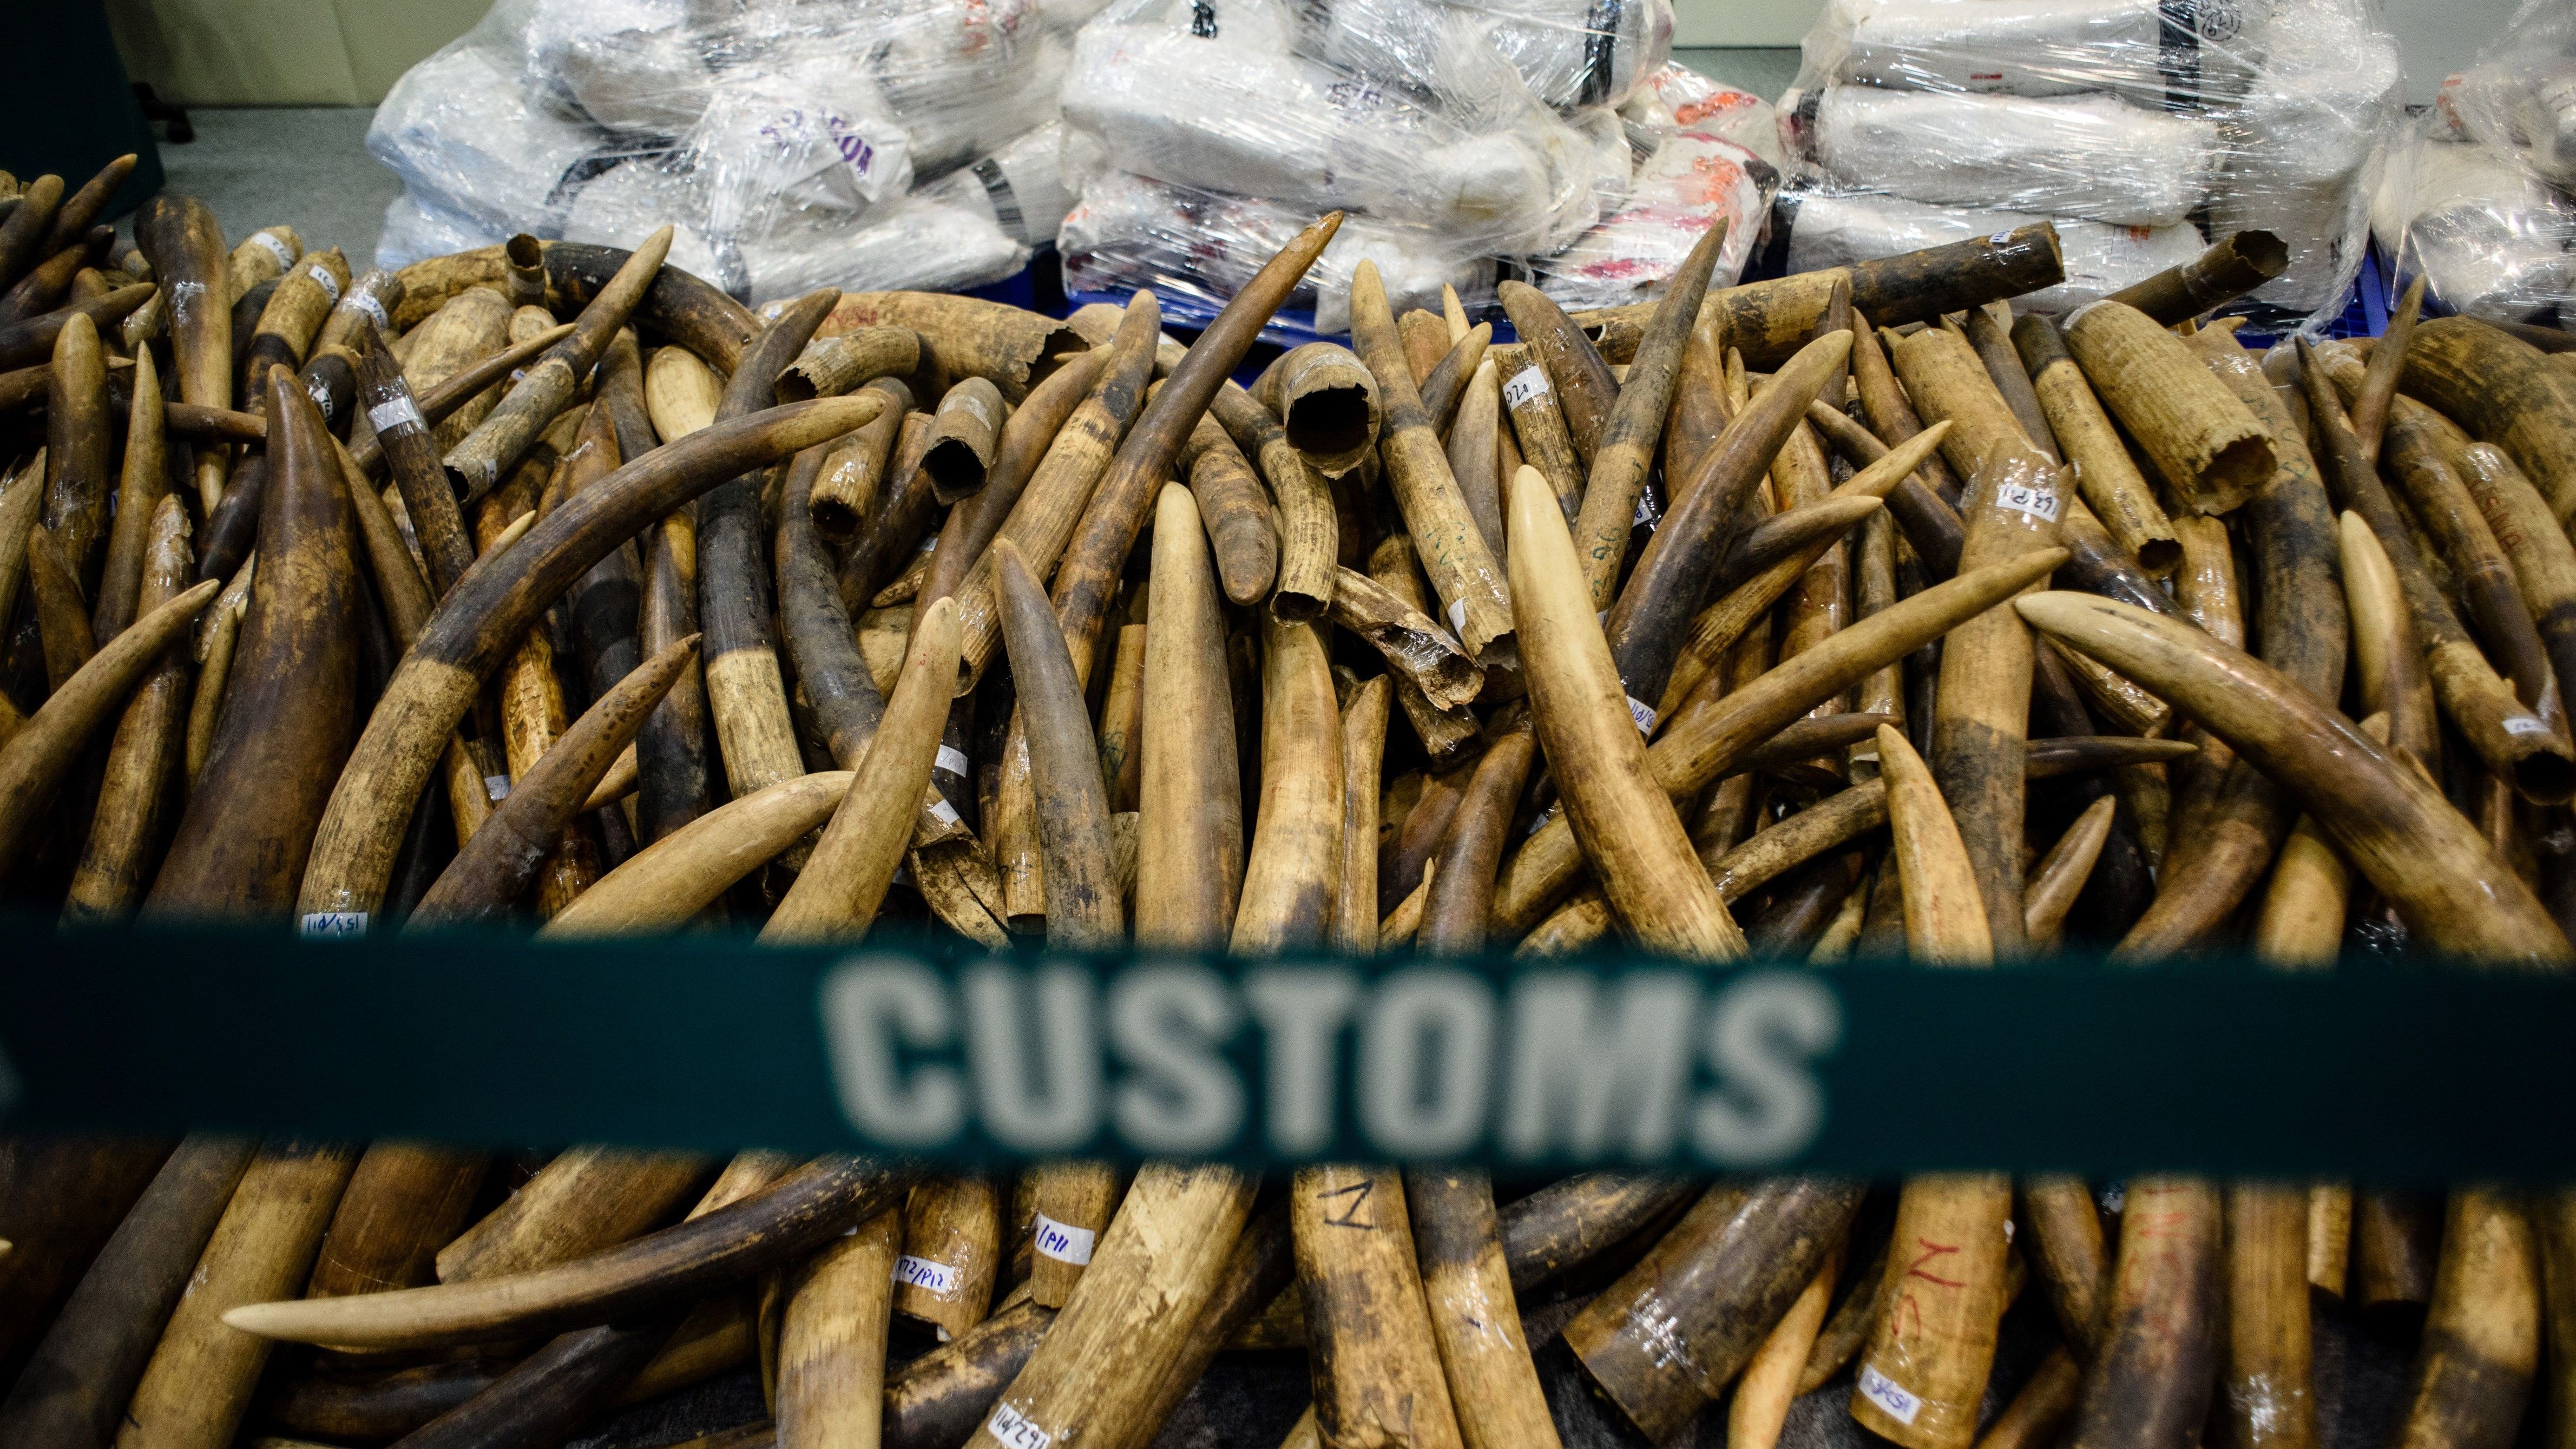 Seized elephant ivory during the news conference Thursday.